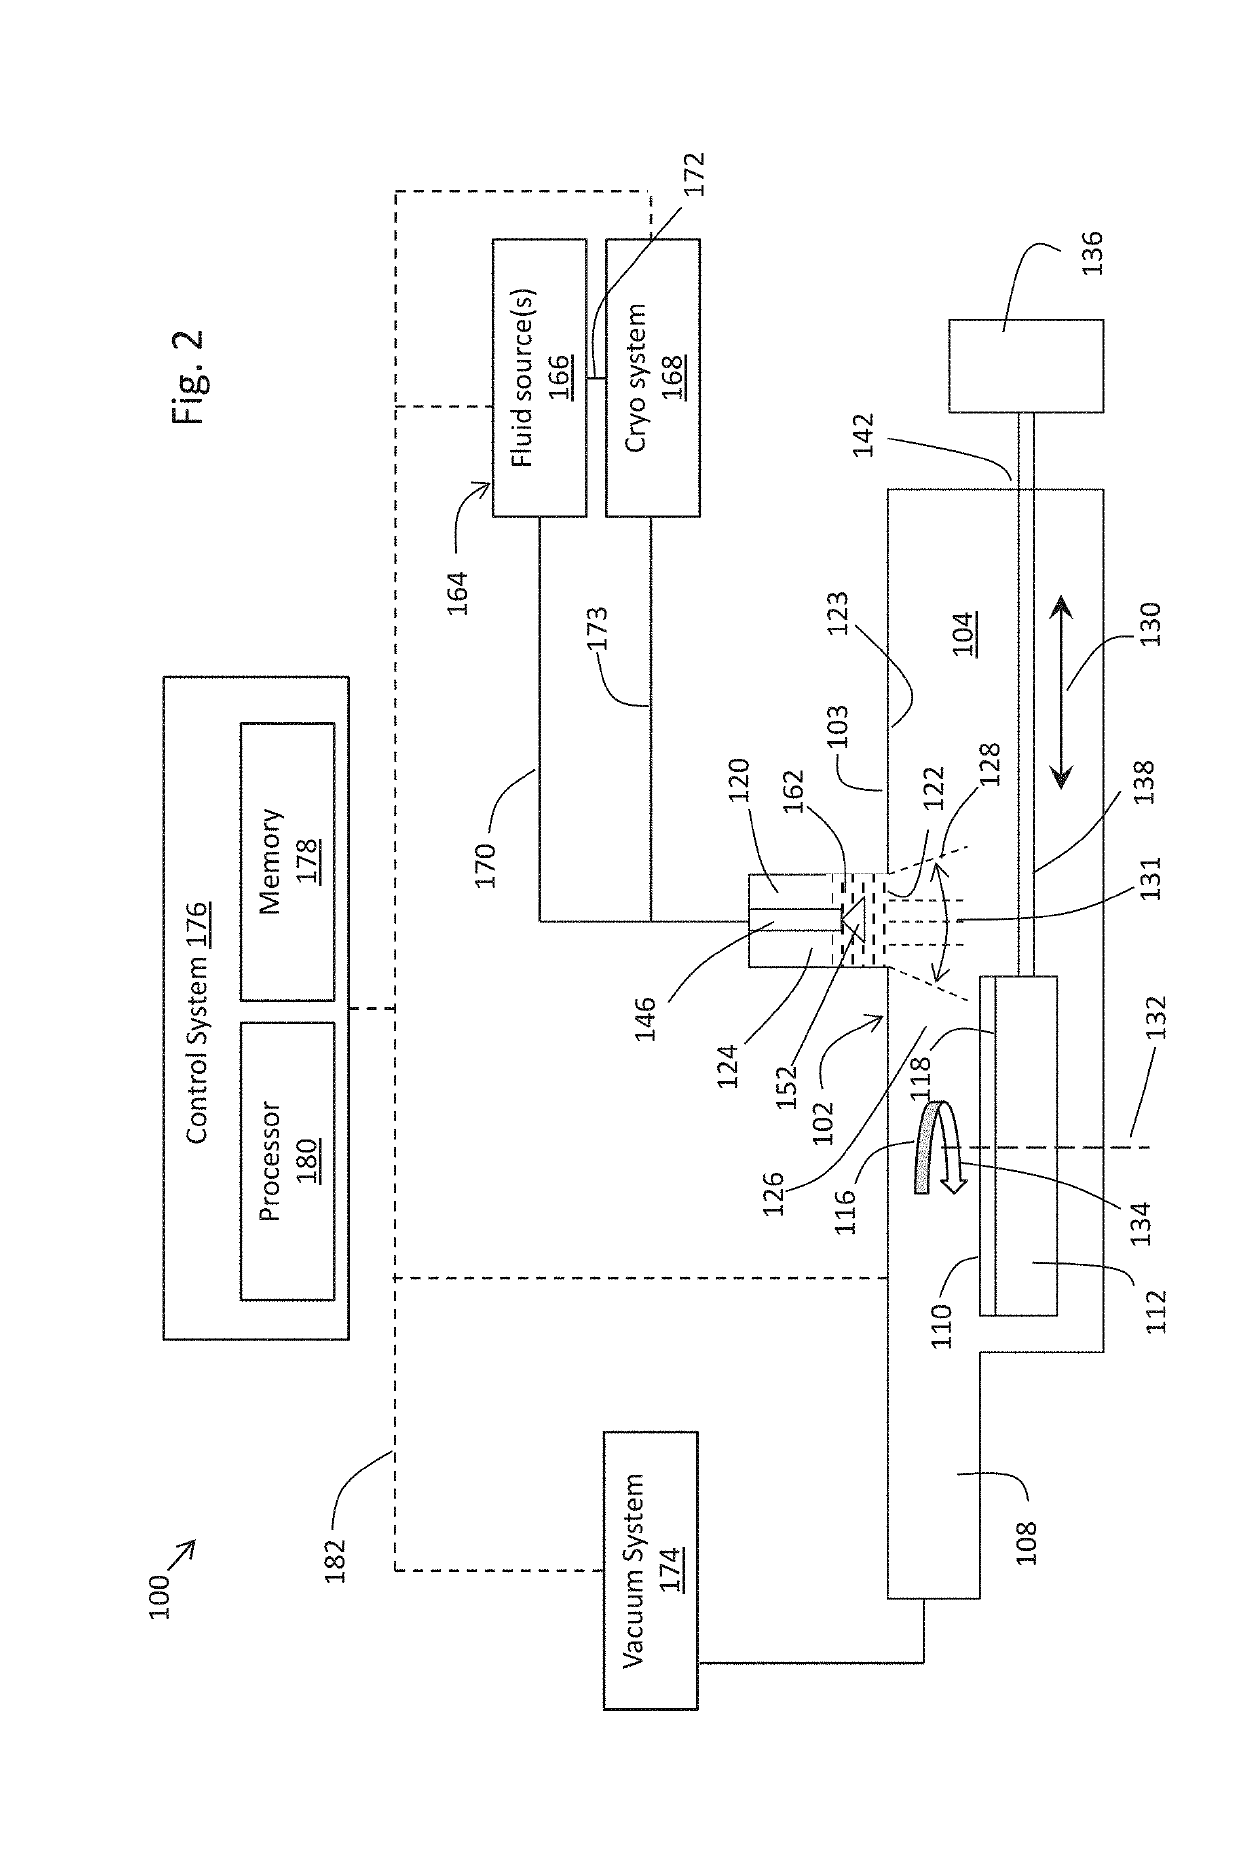 Microelectronic treatment system having treatment spray with controllable beam size